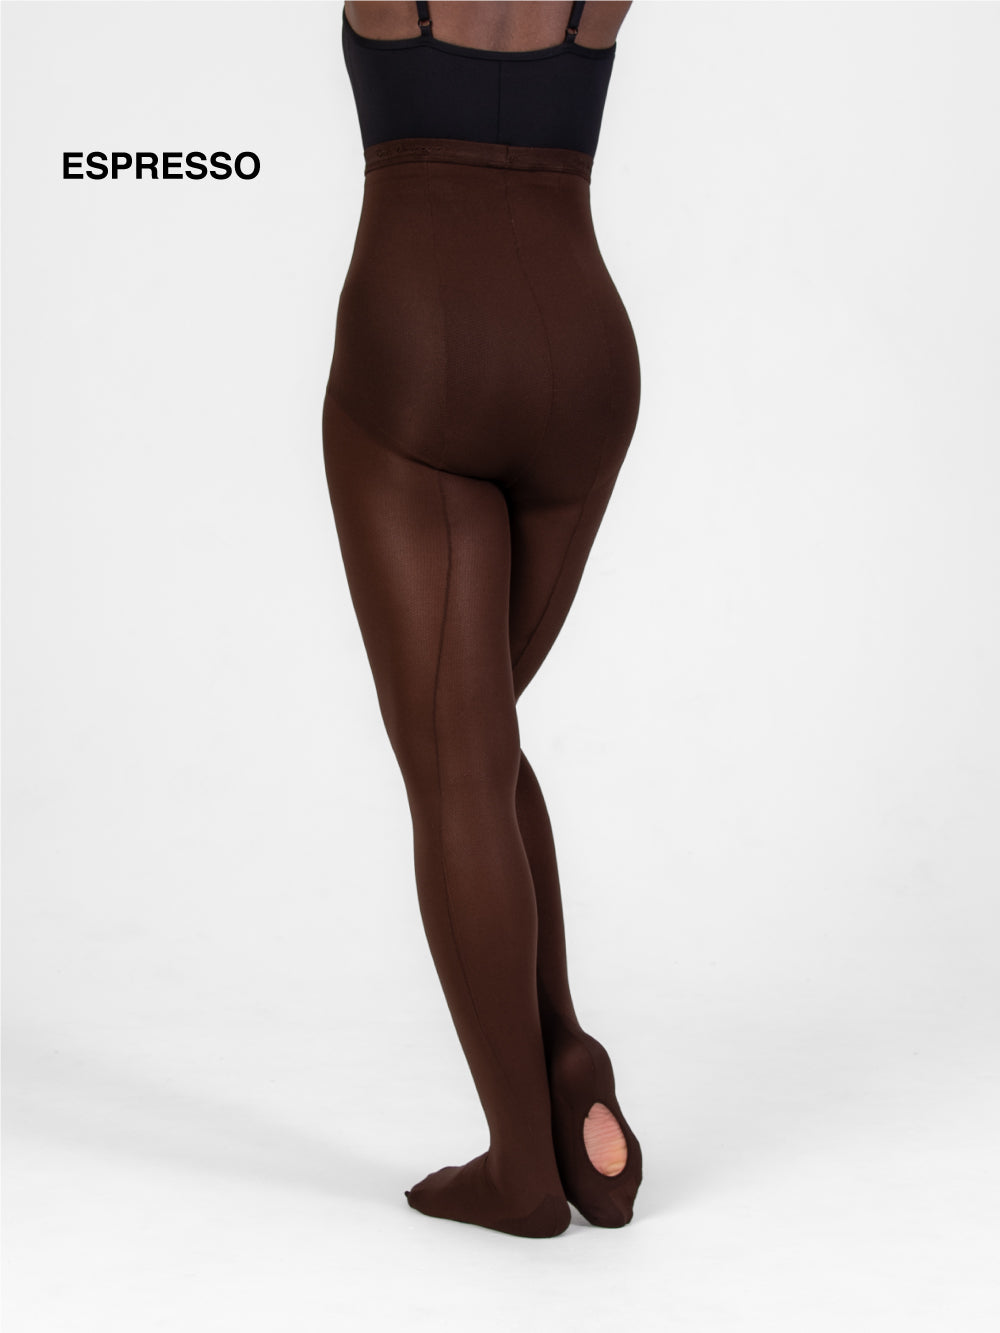 Womens Seamed Professional Mesh Transition Tights - Convertible